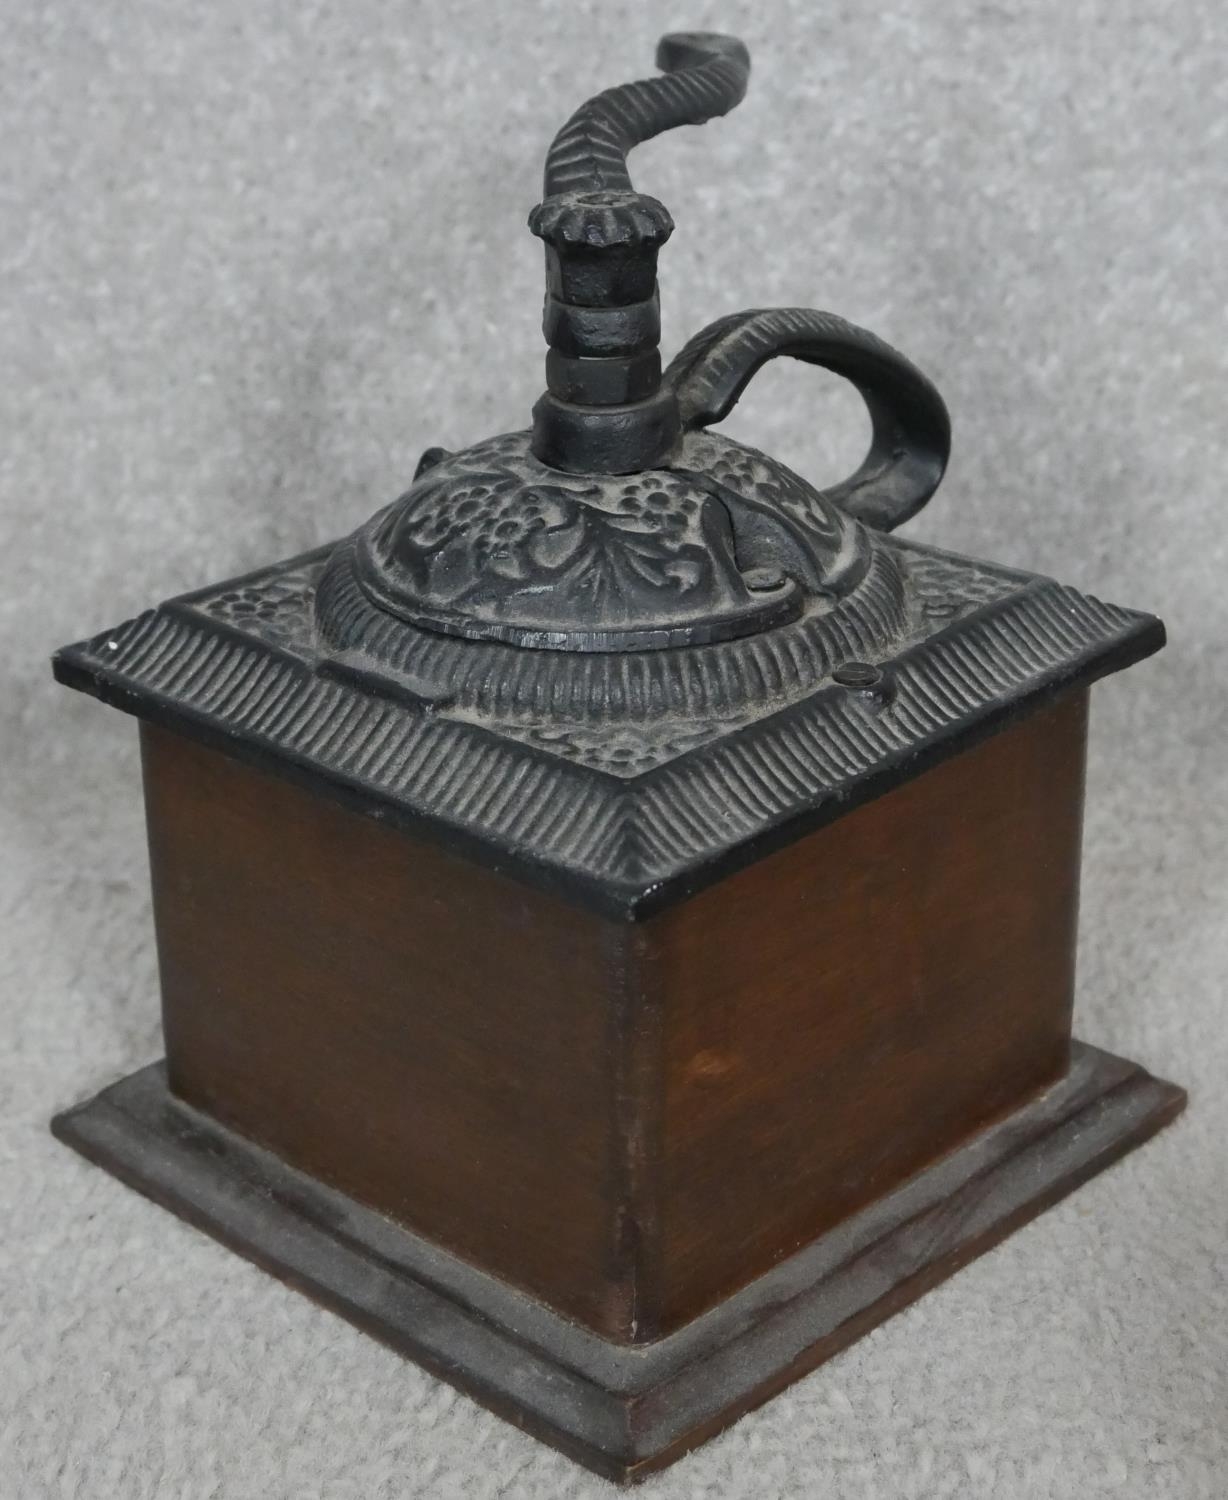 A brass and copper coal scuttle, a copper pan and teapot, a vintage coffee grinder and a 2lb weight. - Image 5 of 8